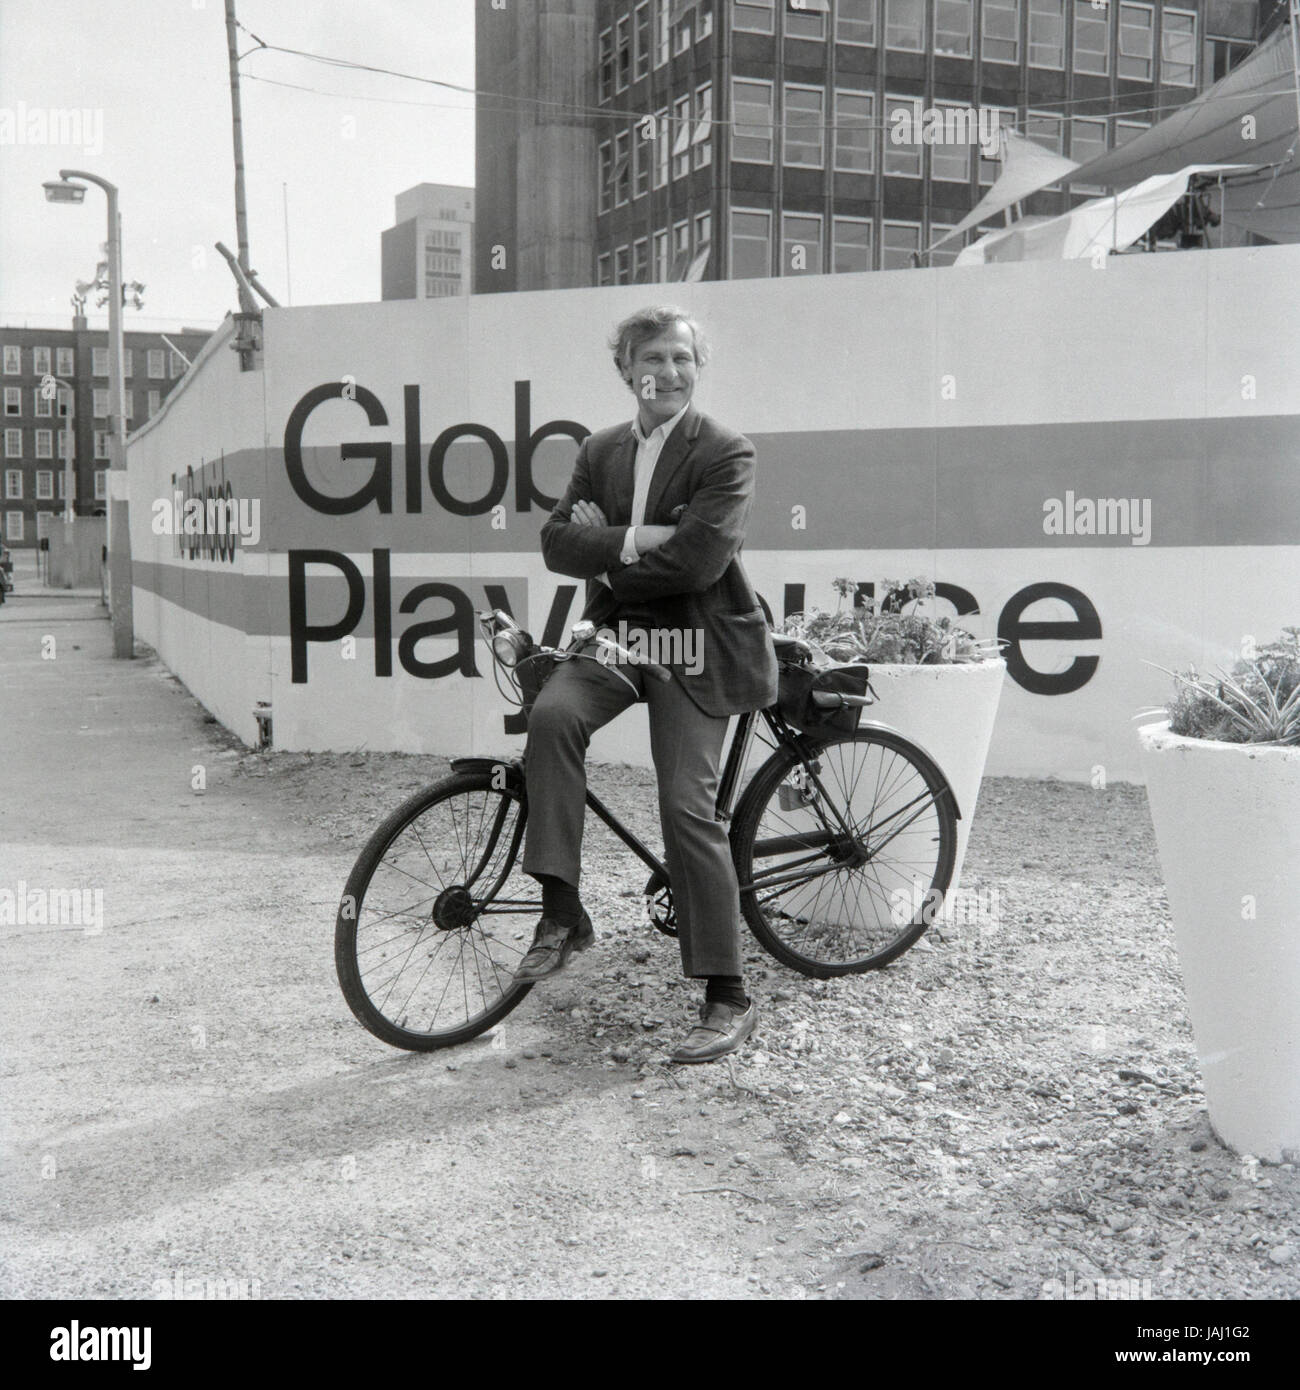 Actor and director Sam Wanamaker on his bicycle outside his proposed site for the Globe Playhouse theatre in London in 1972. The Sam Wanamaker Playhouse is an indoor theatre forming part of Shakespeare's Globe, along with the Globe Theatre on Bankside, London. Built making use of 17th-century plans for an indoor theatre, the playhouse recalls the layout and style of the Blackfriars Theatre, although it is not an exact reconstruction. Its shell was built during the construction of the Shakespeare's Globe complex, notable for the reconstruction of the open-air Globe Theatre of the same period. Stock Photo